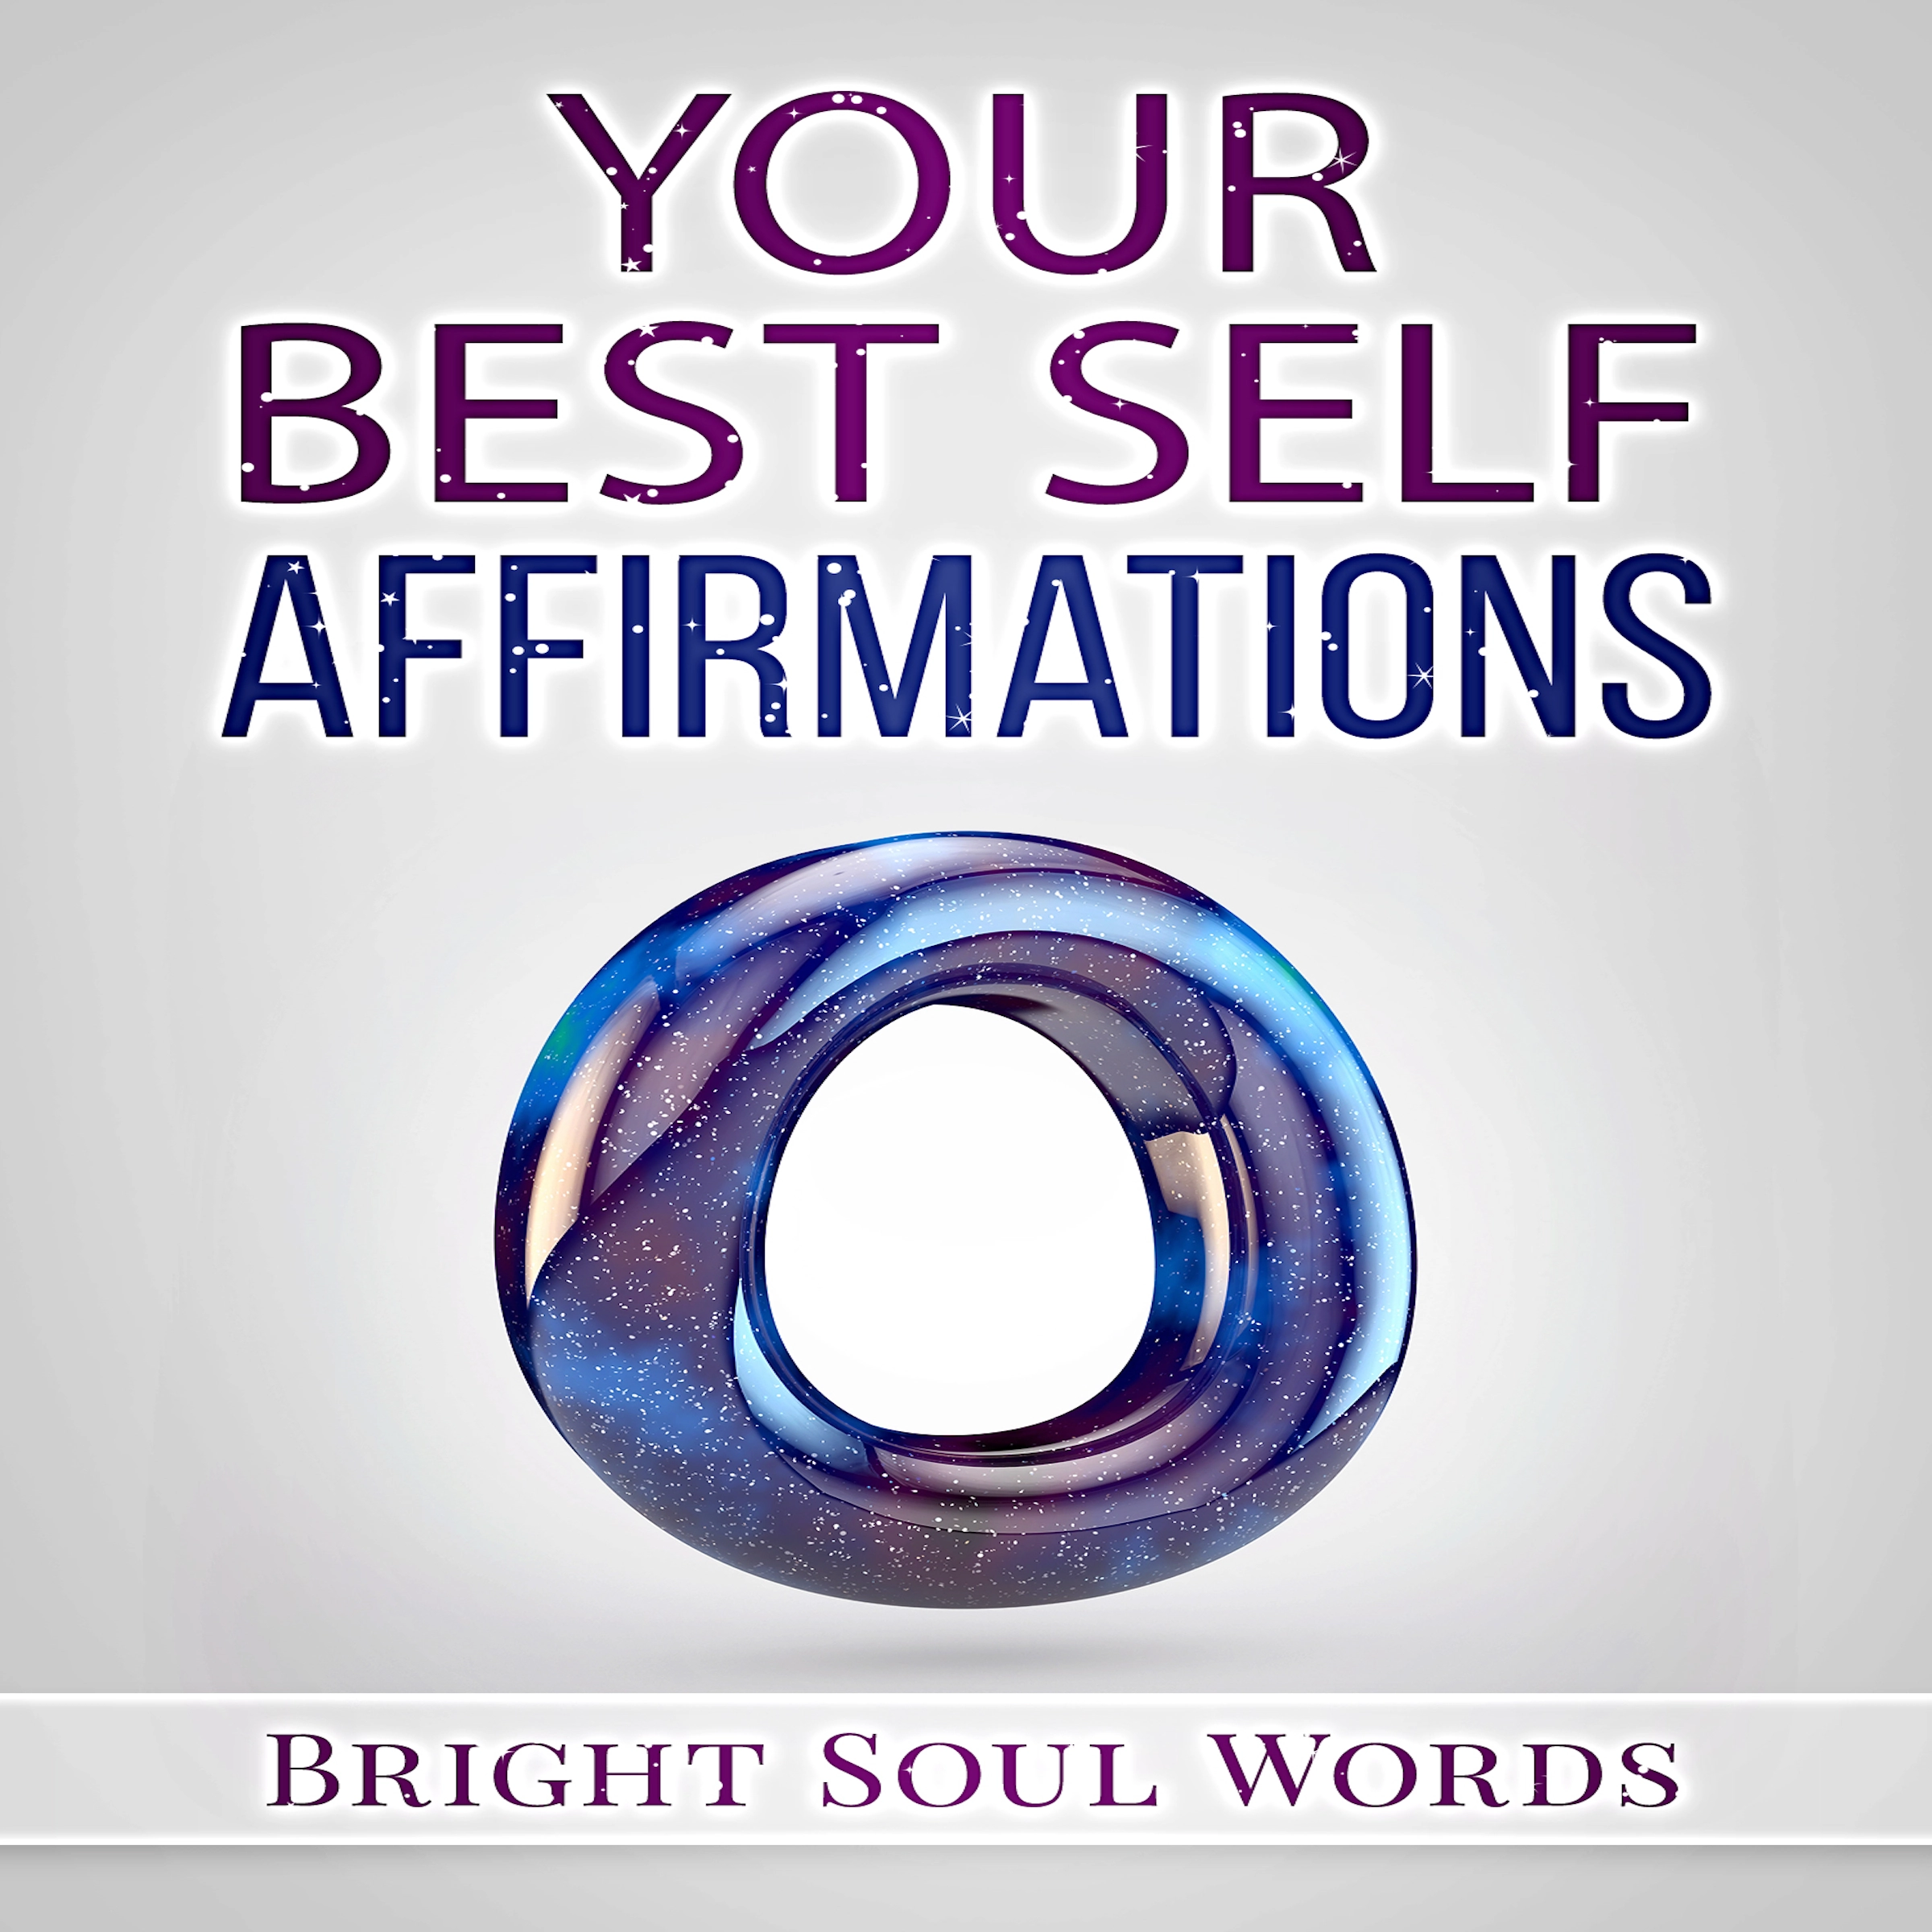 Your Best Self Affirmations Audiobook by Bright Soul Words